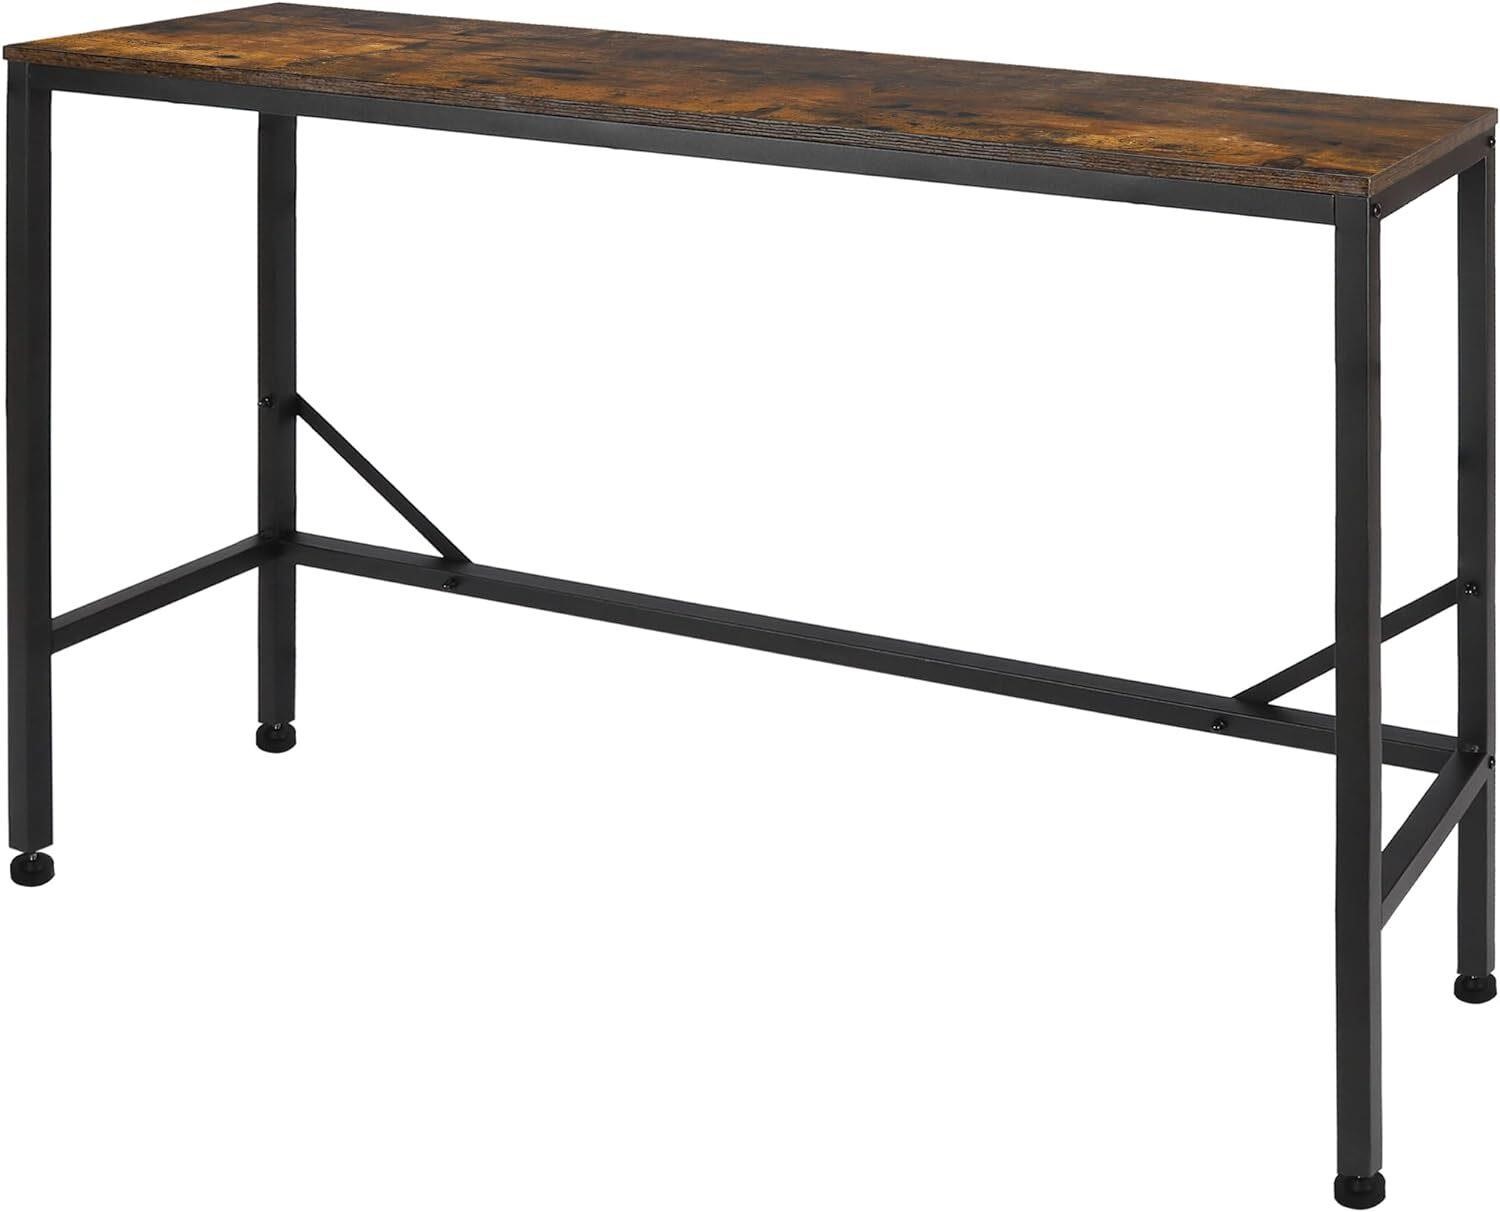 Console Table  Entry  Sofa Display - Black